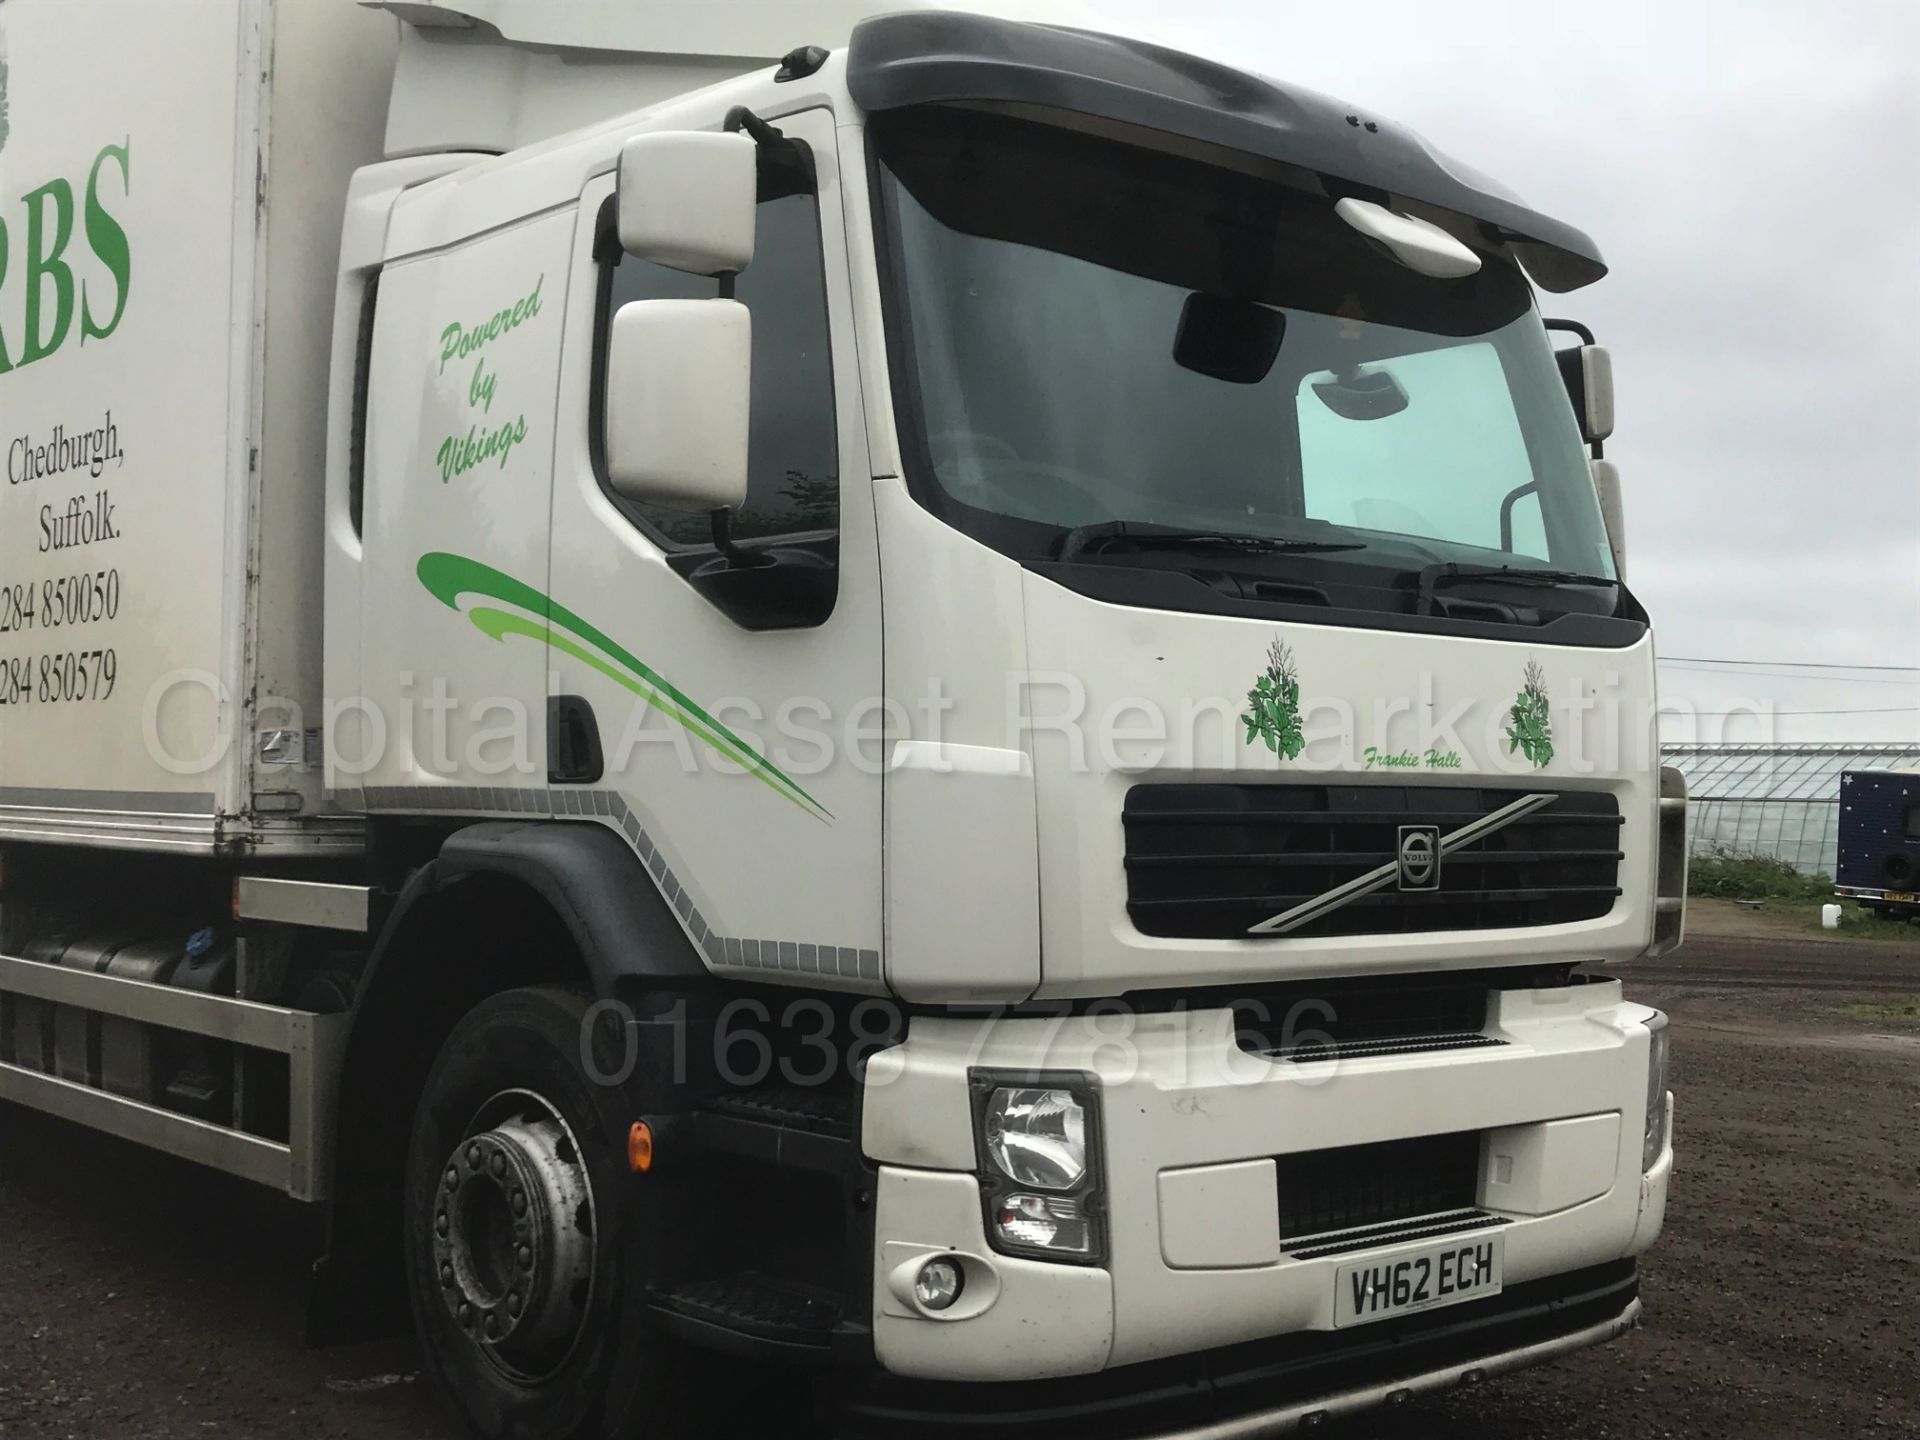 VOLVO ES260 '18 TONNE - REFRIGERATED TRUCK' *SLEEPER CAB* (2013 MODEL) '7L DIESEL - AUTOMATIC' - Image 11 of 32